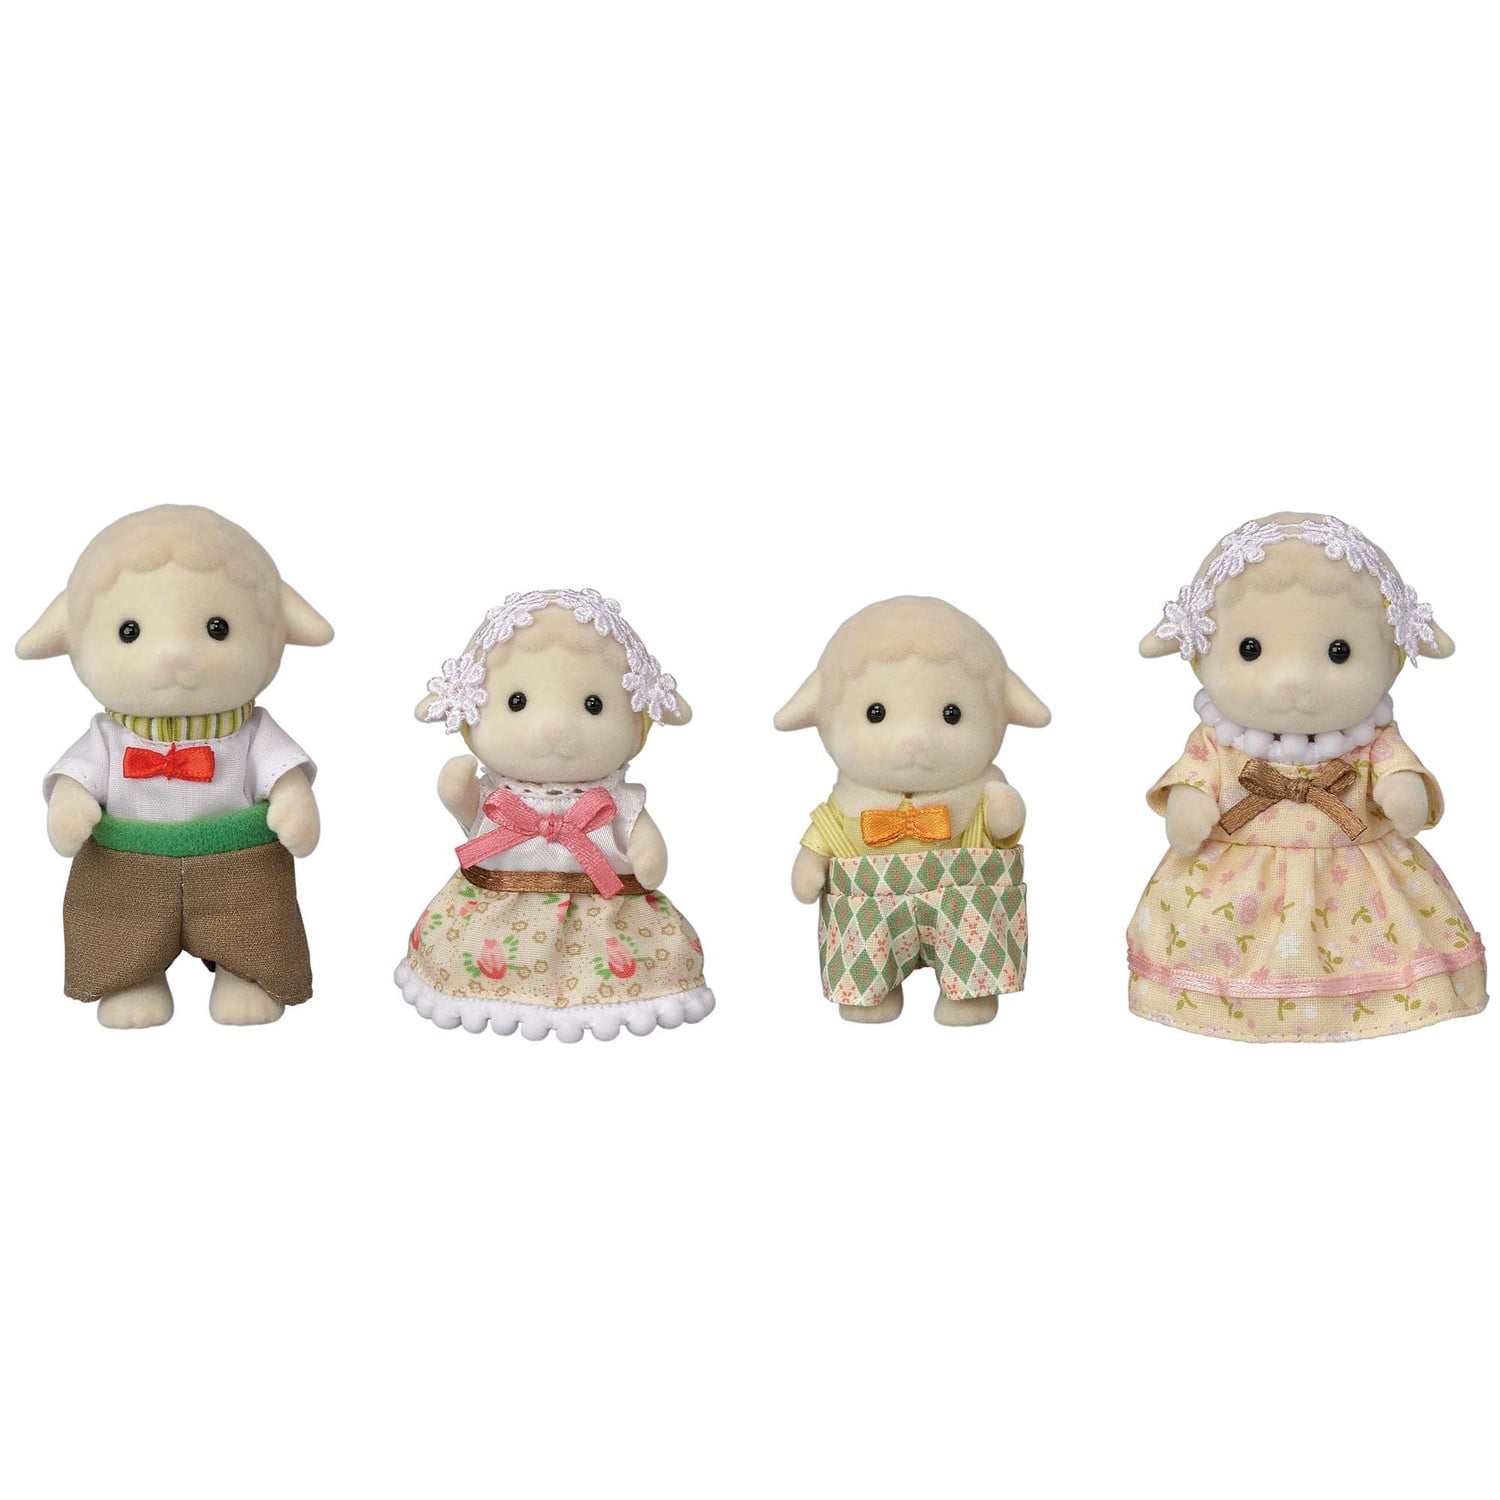 Sylvanian Families and Calico Critters Felt Dresses and